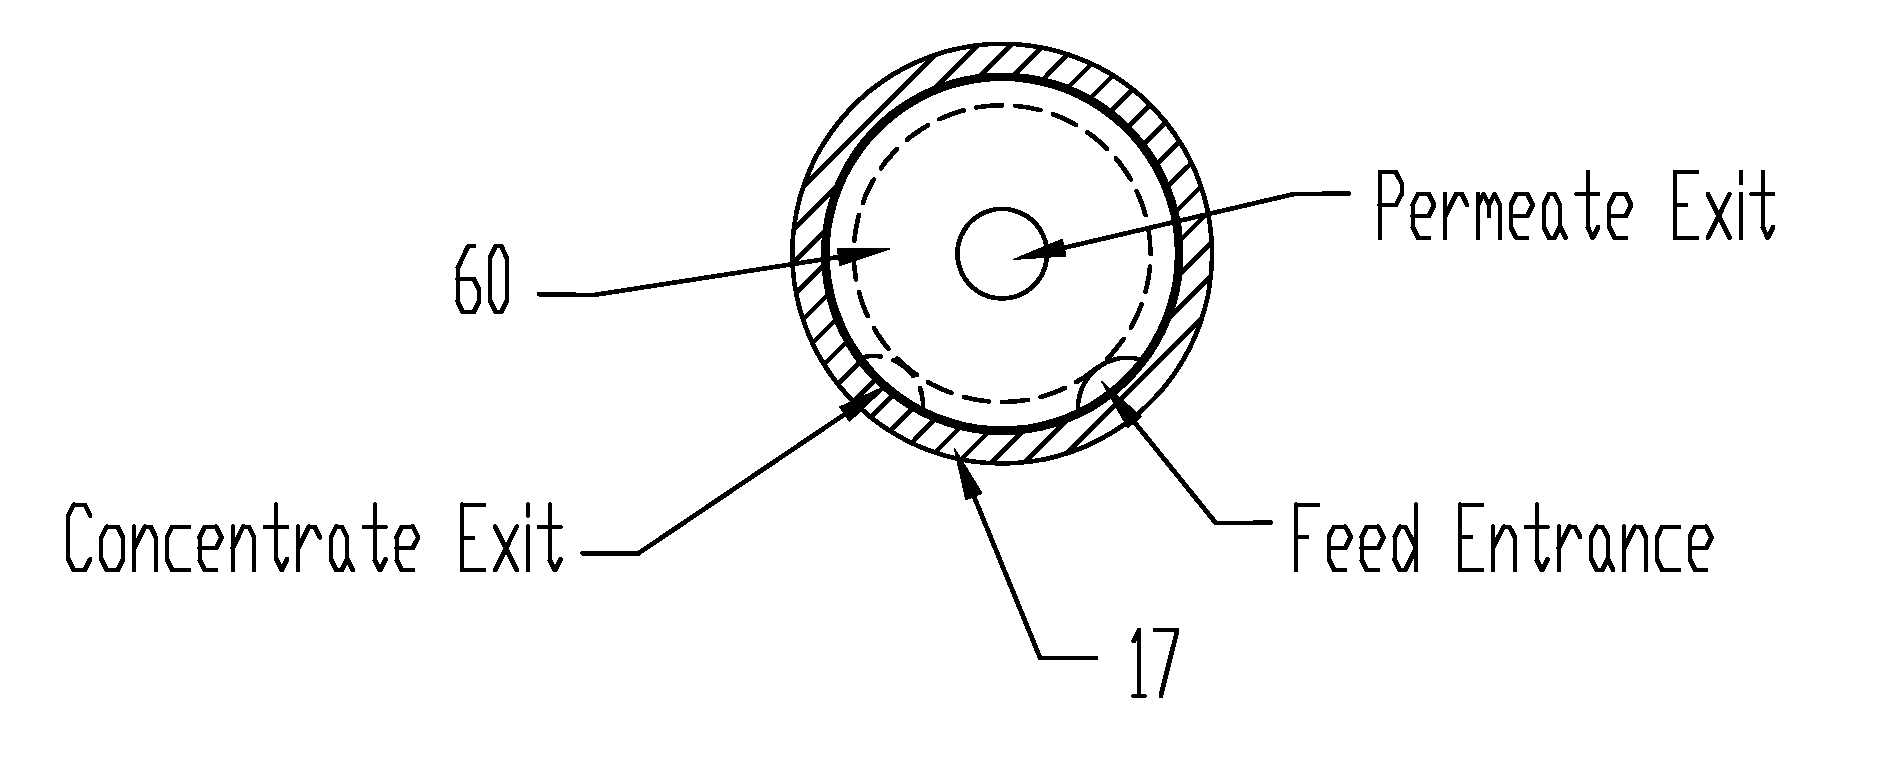 System and Method of Fluid Filtration Utilizing Cross-Flow Currents